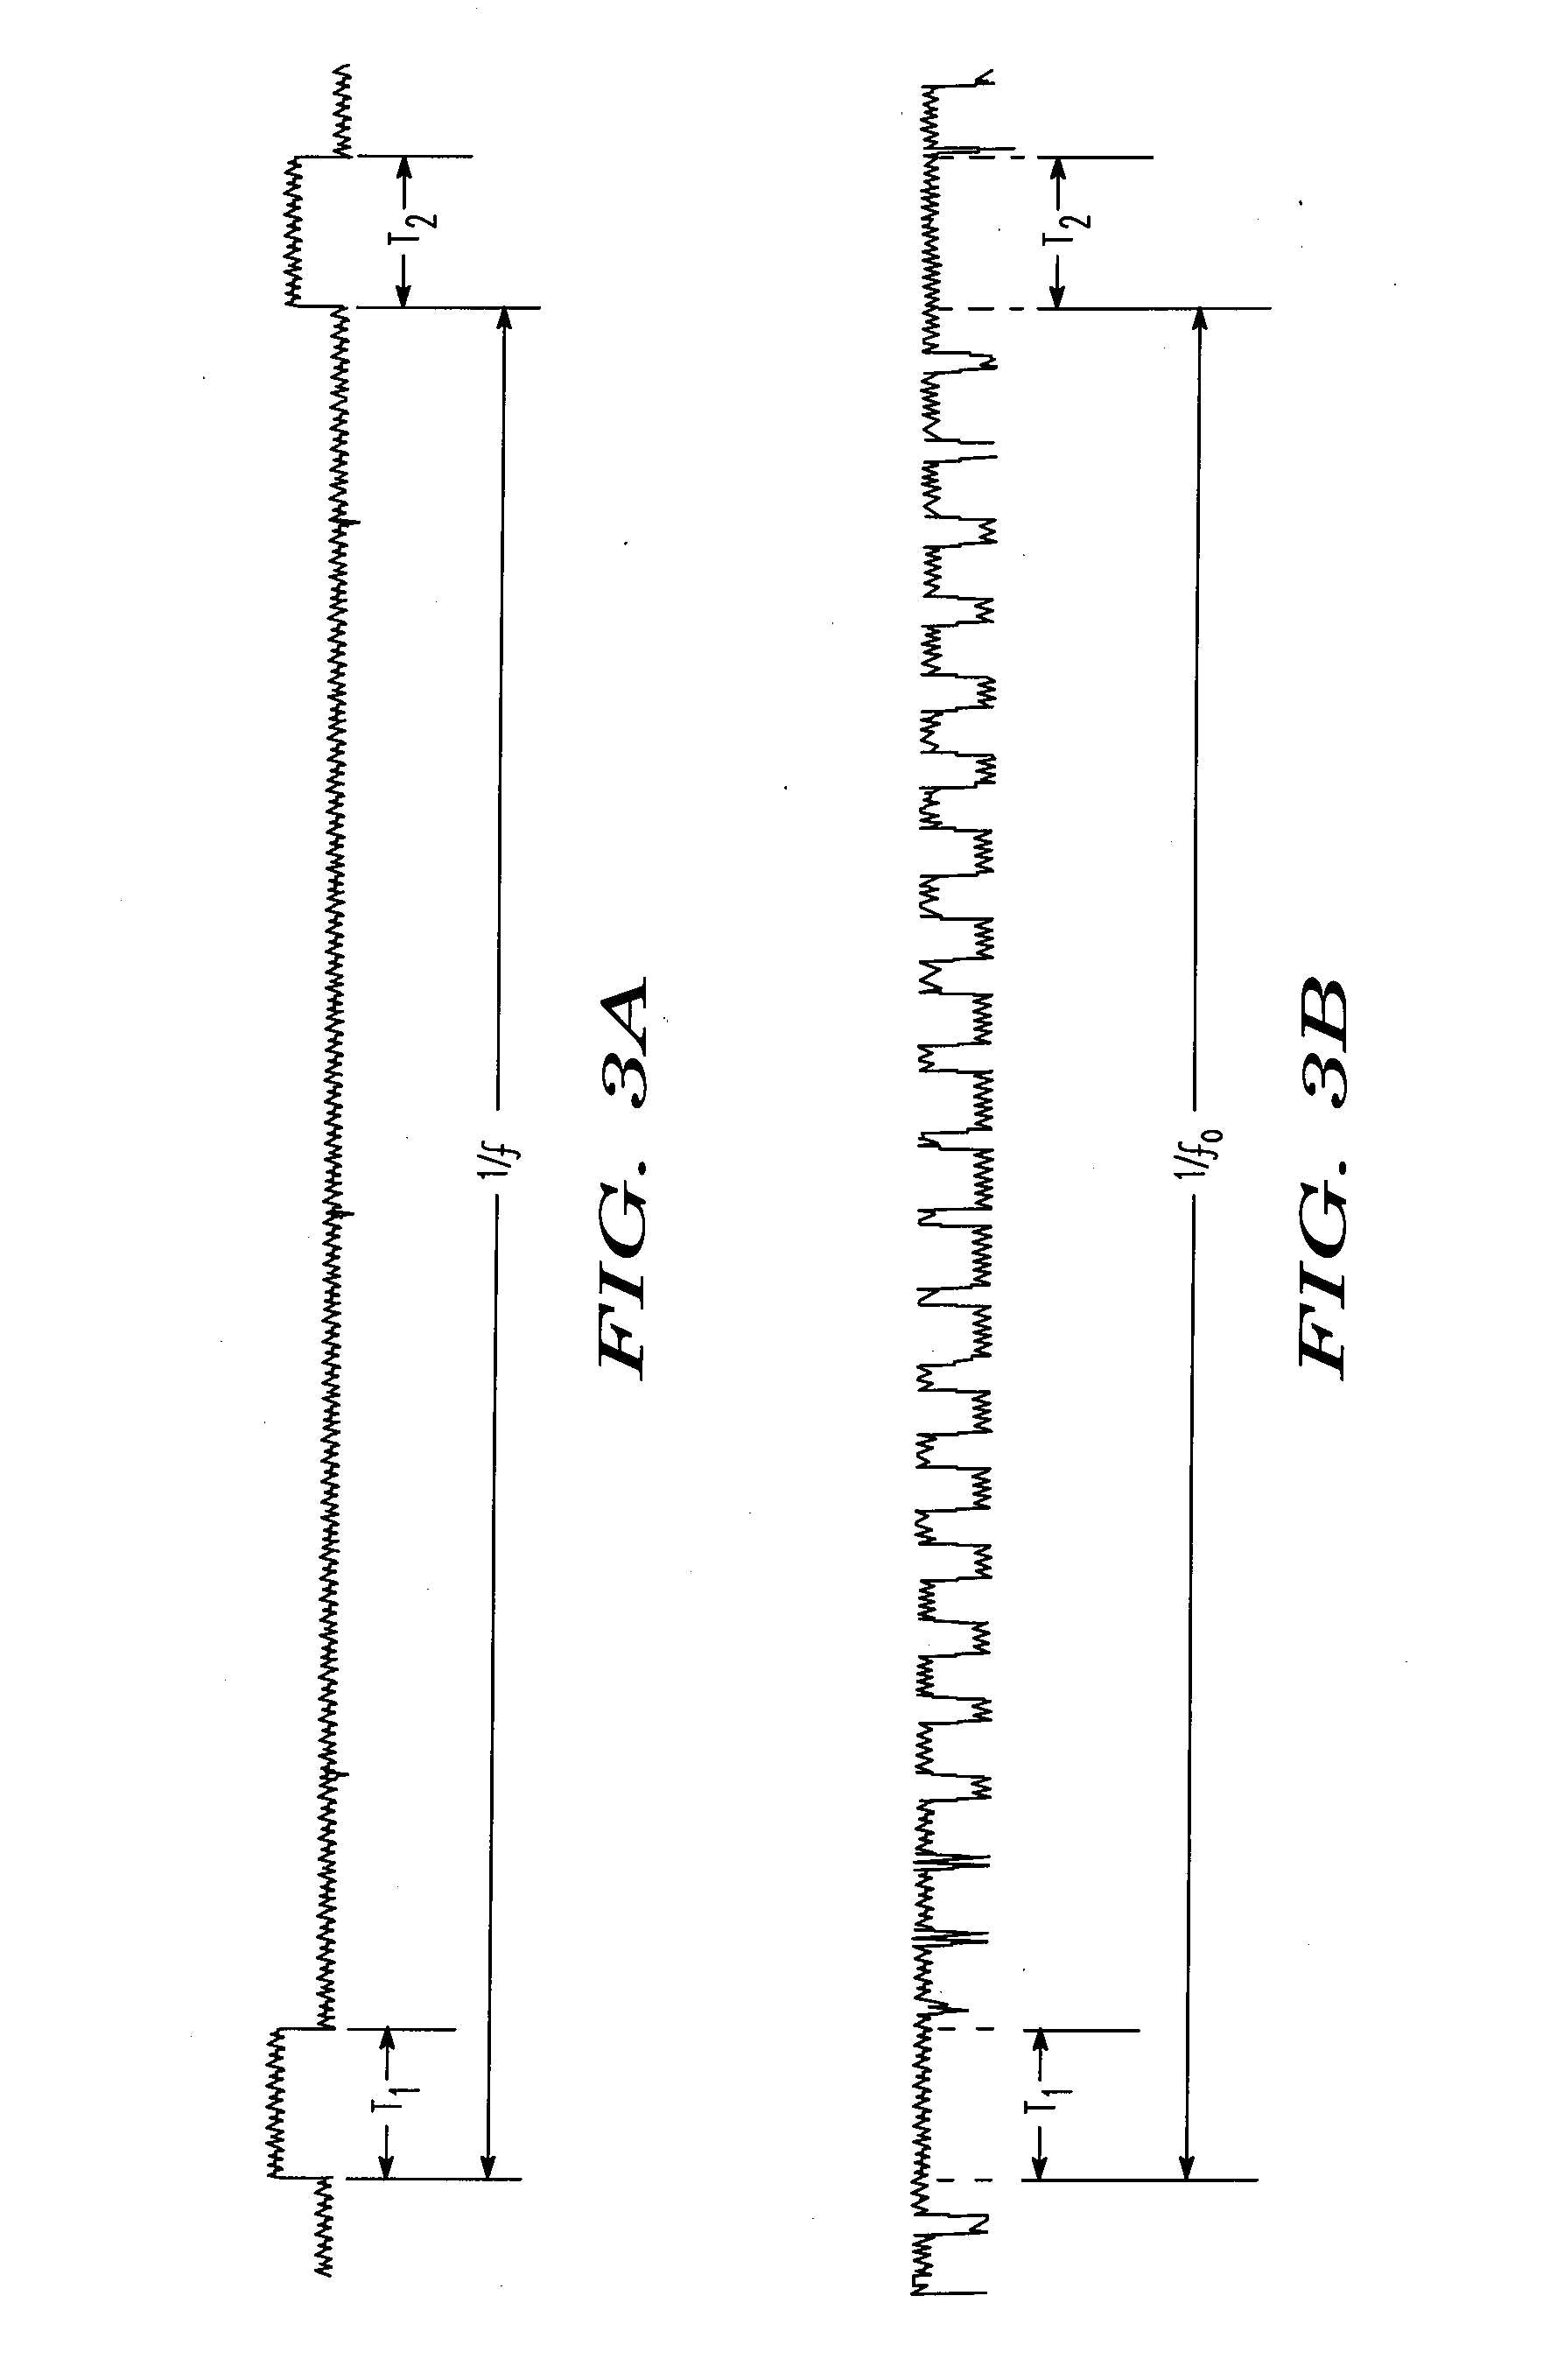 Method and apparatus for reducing the visual discomfort of the illumination generated by imaging scanners